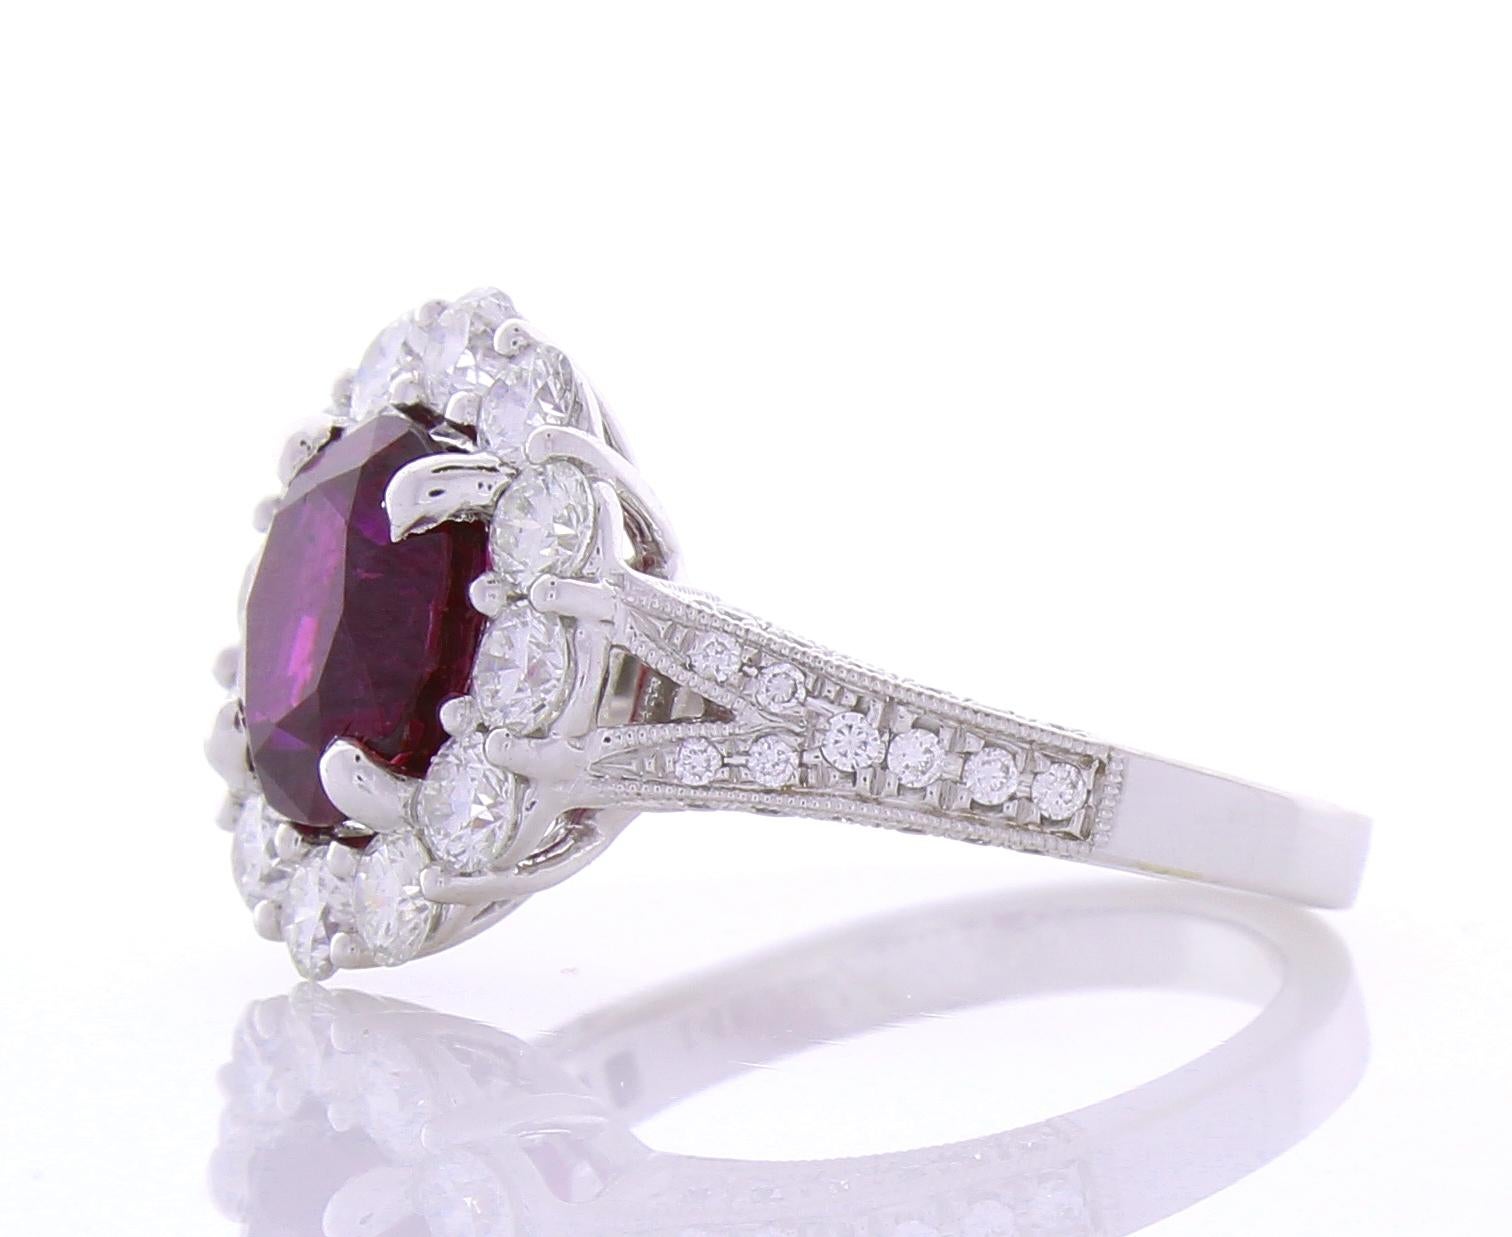 Women's 2.97 Carat Oval Purple Sapphire and Diamond Cocktail Ring in 18 Karat White Gold